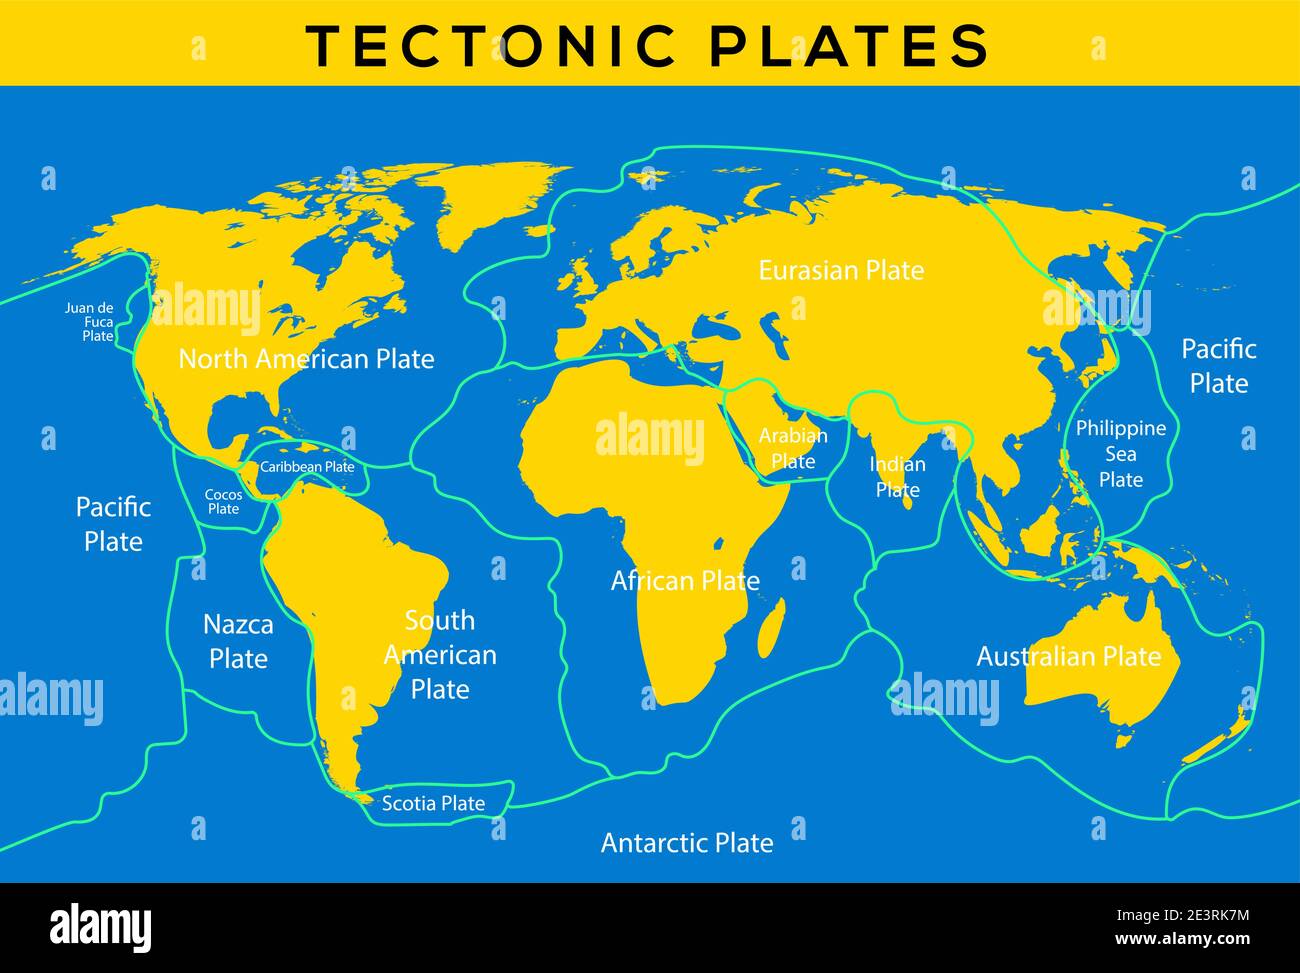 Tectonic plate earth map. Continental ocean pacific, volcano ...